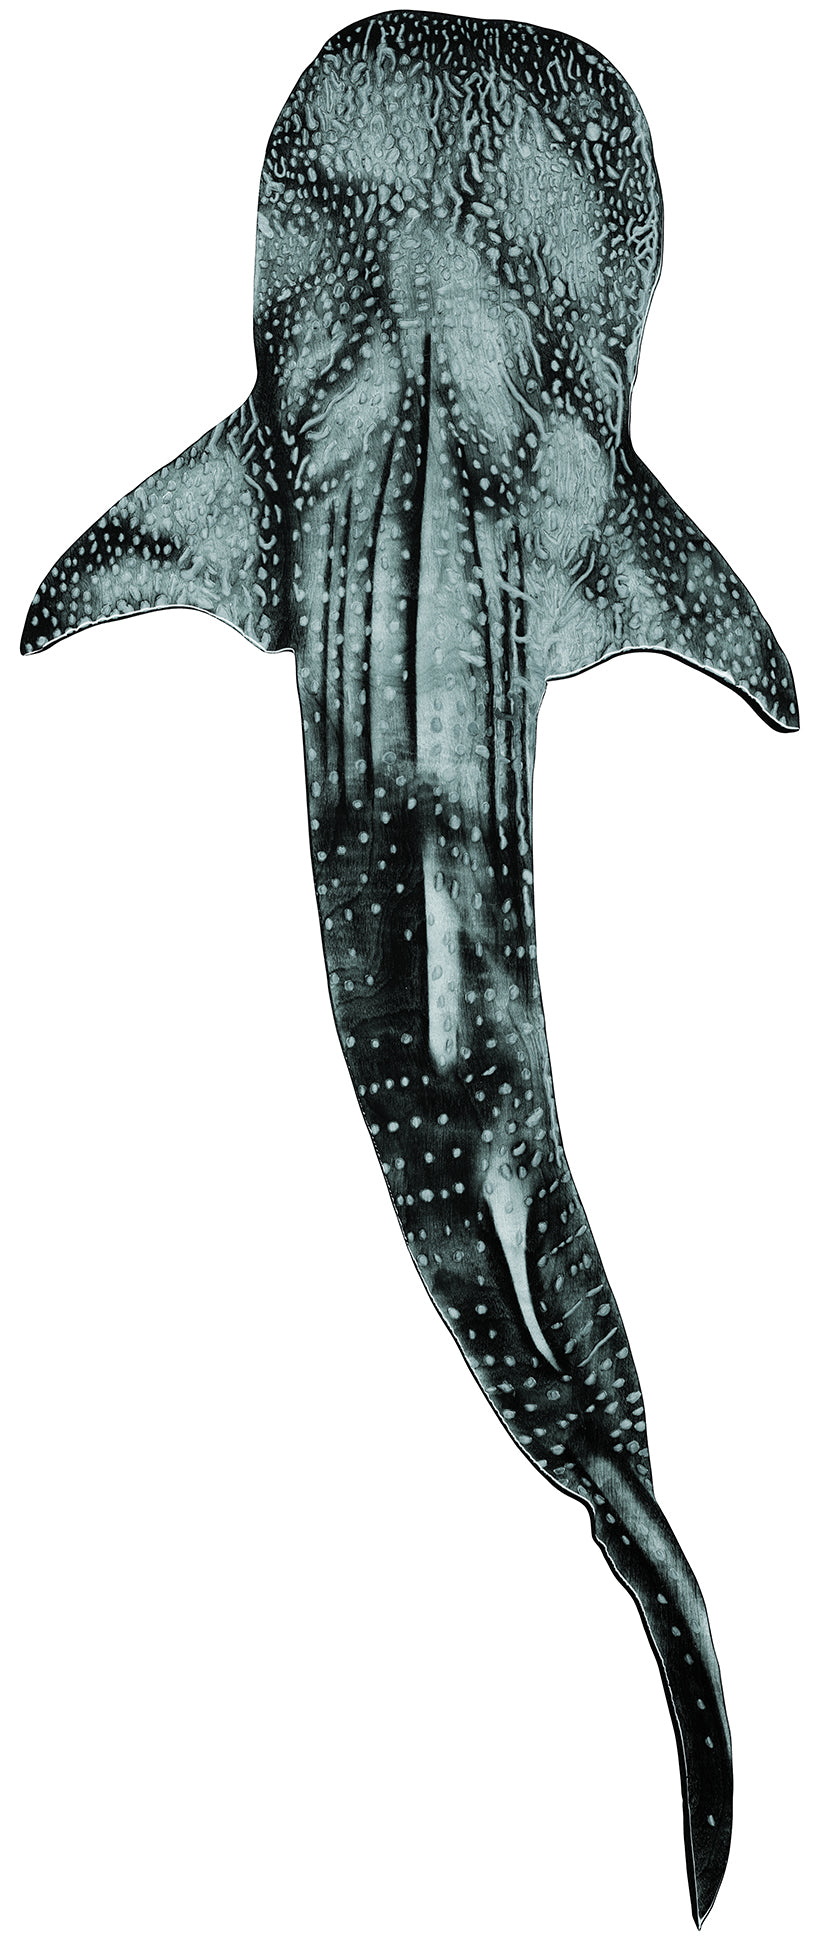 Whale Shark Reproduction